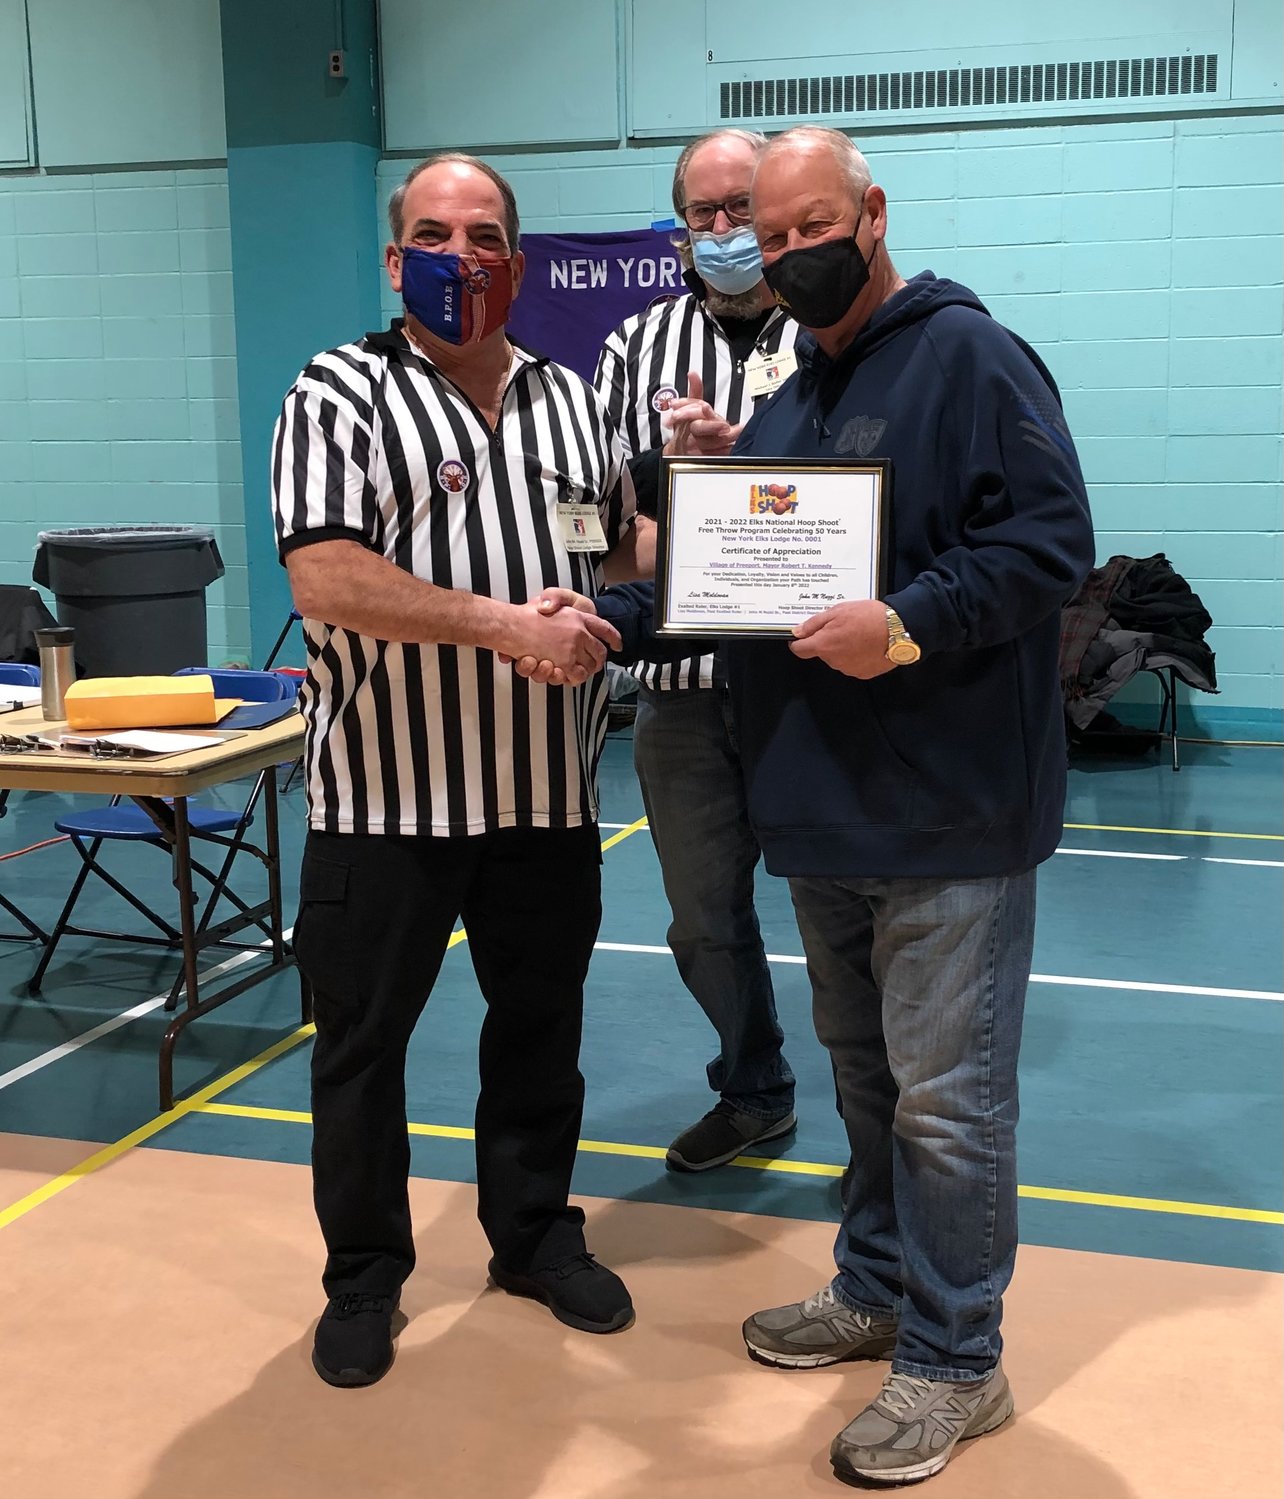 John Nuzzi Sr., left, presented Mayor Robert T. Kennedy, right, with a certificate of recognition to thank the Village of Freeport for its support of the Hoop Shoot.